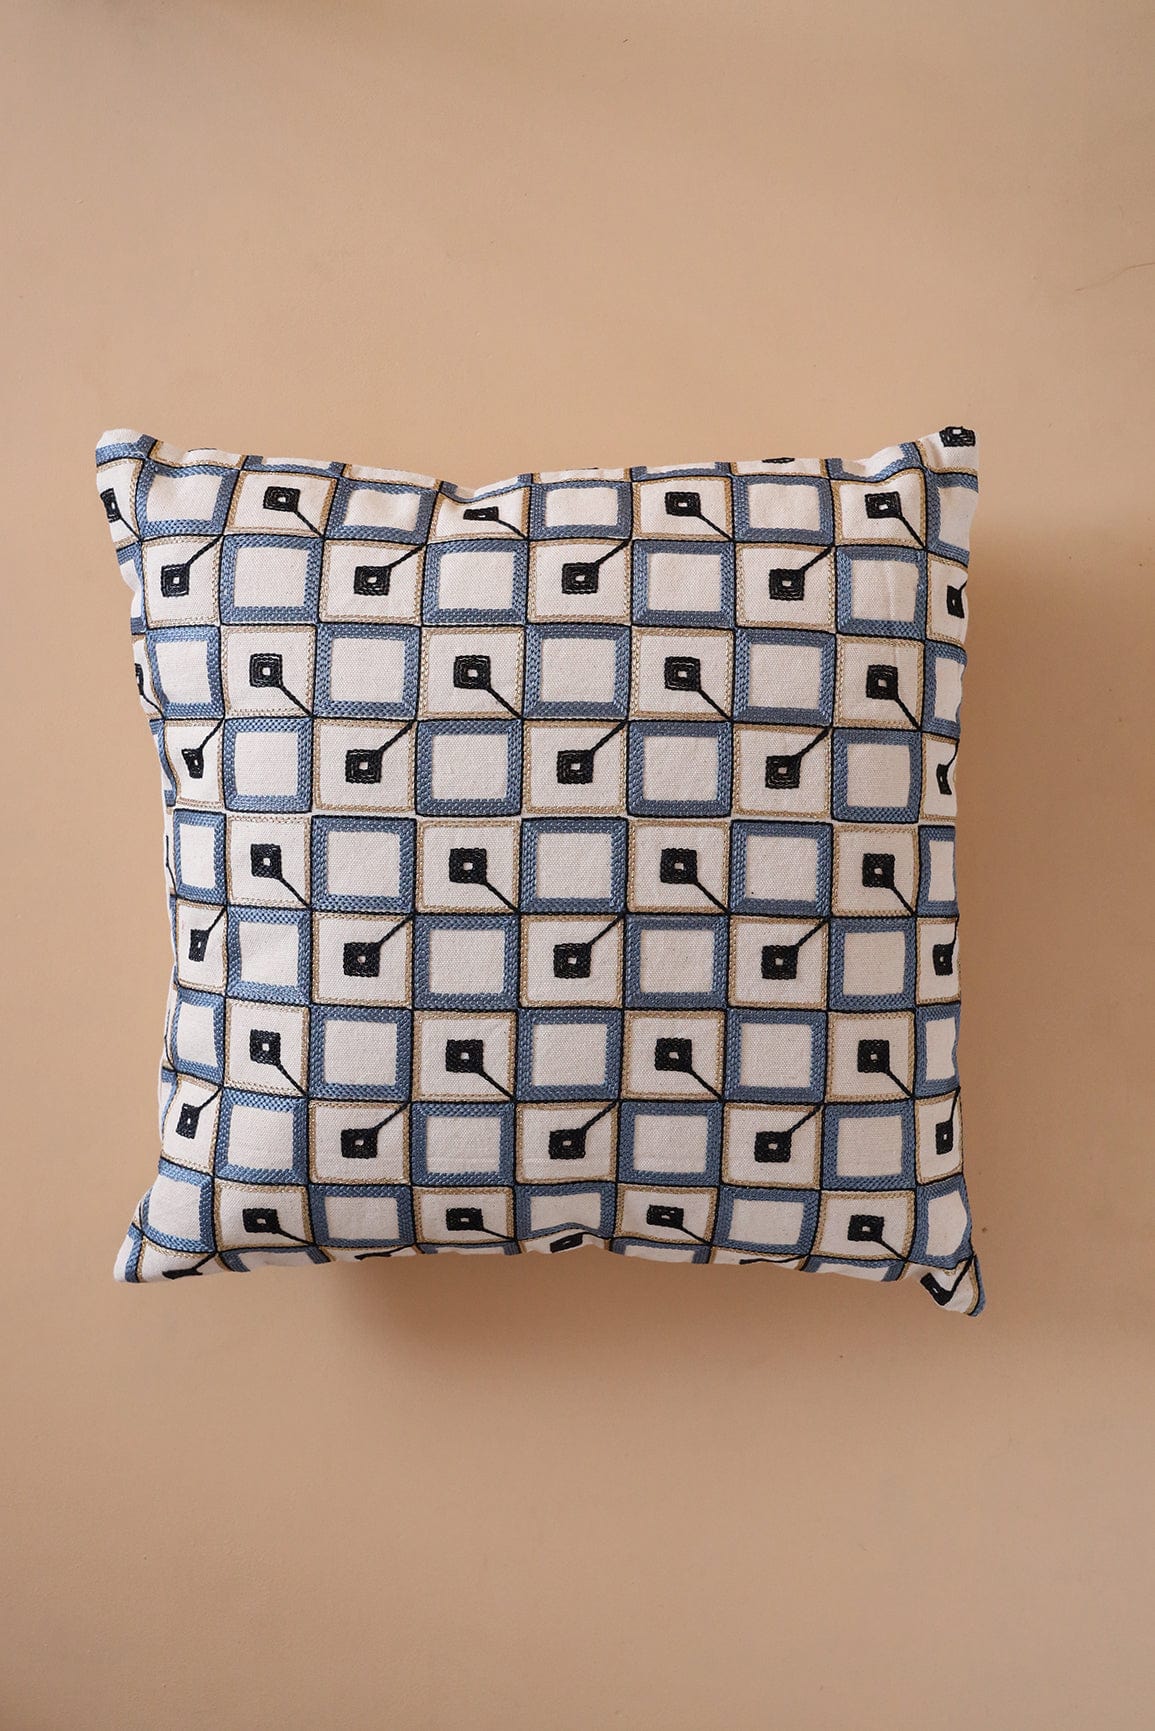 doeraa Grey and Black Pattern Embroidery on off white cotton Cushion Cover (16*16 inches)